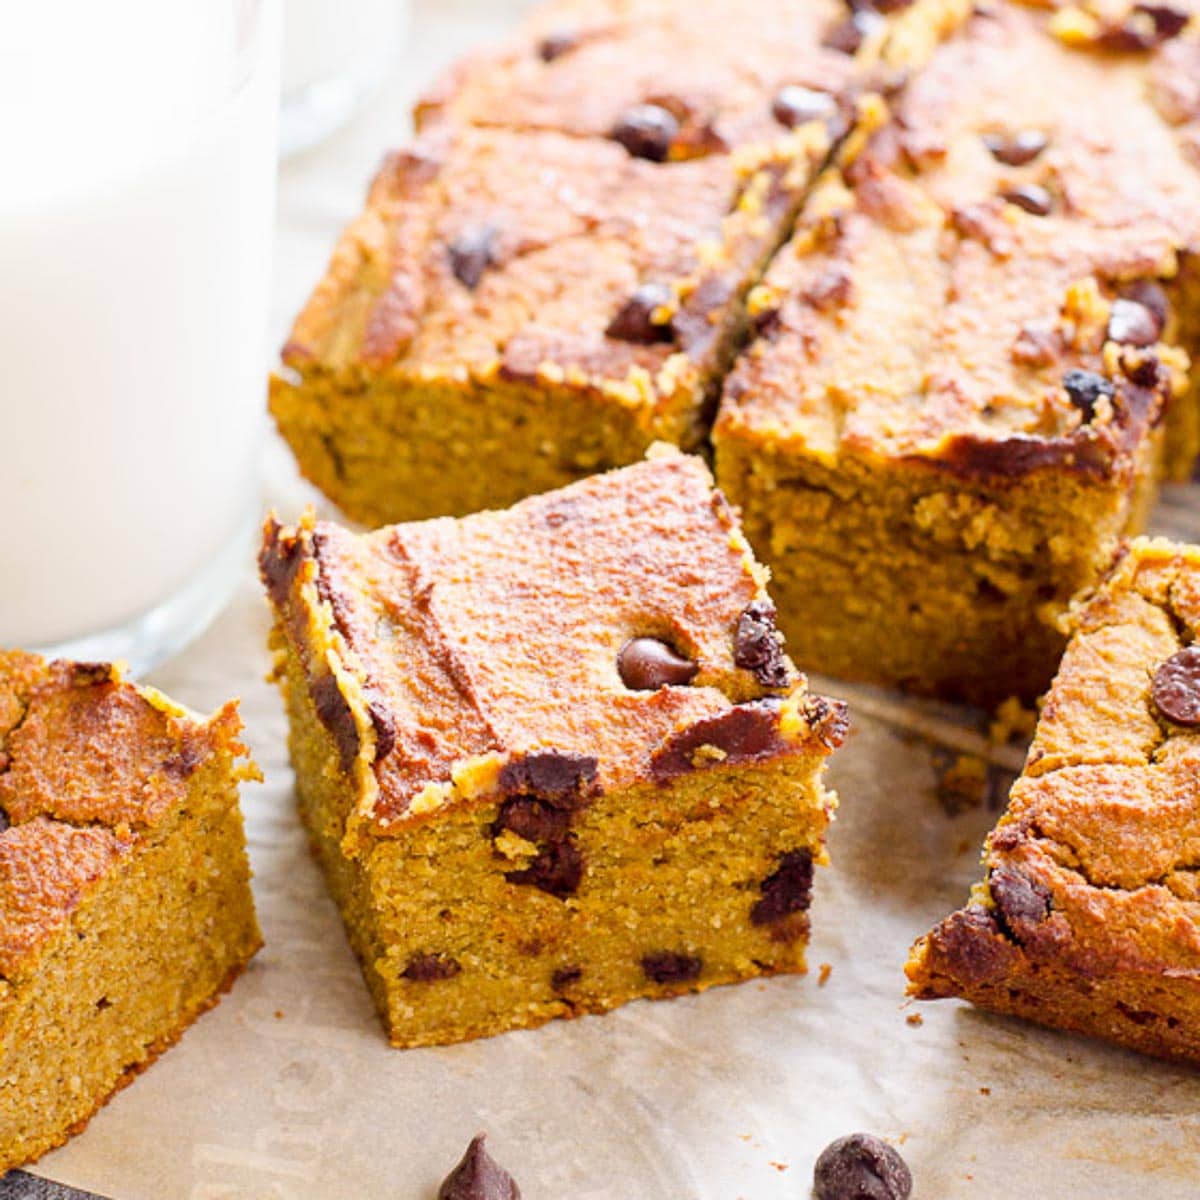 Healthy pumpkin bars cut into squares with a glass of milk.